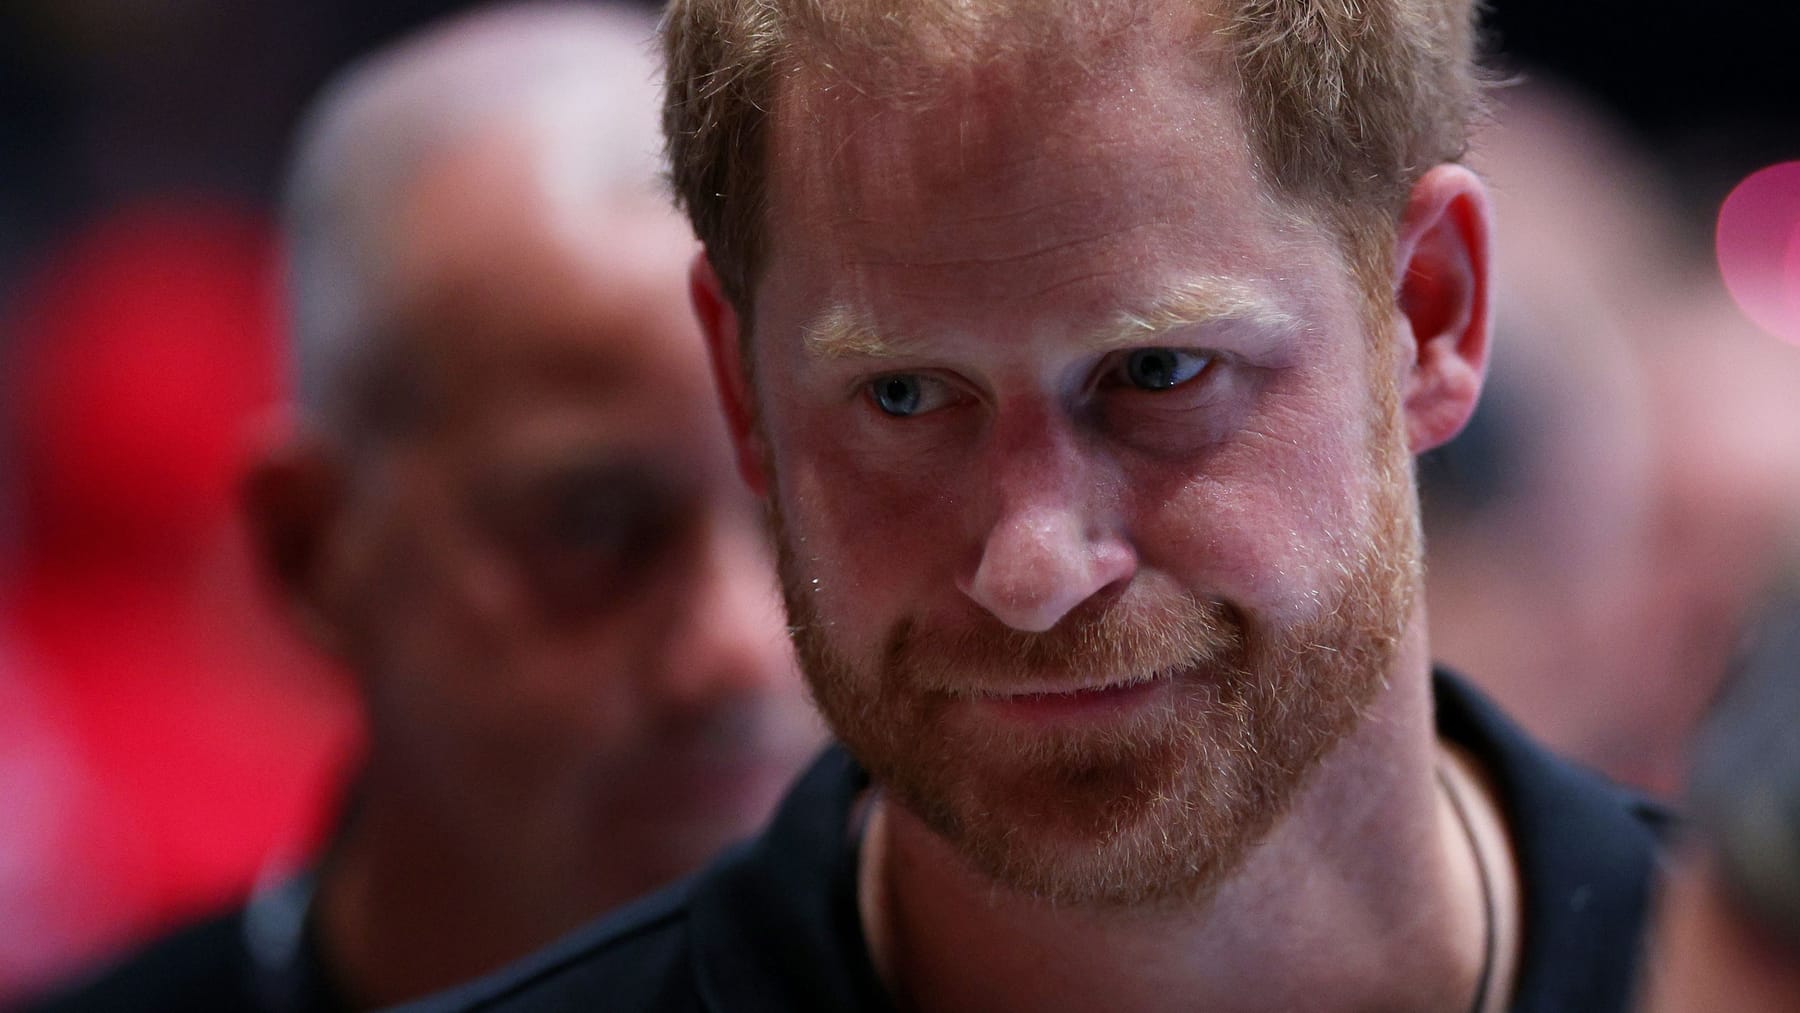 Prince Harry landed in London after Charles III's cancer diagnosis